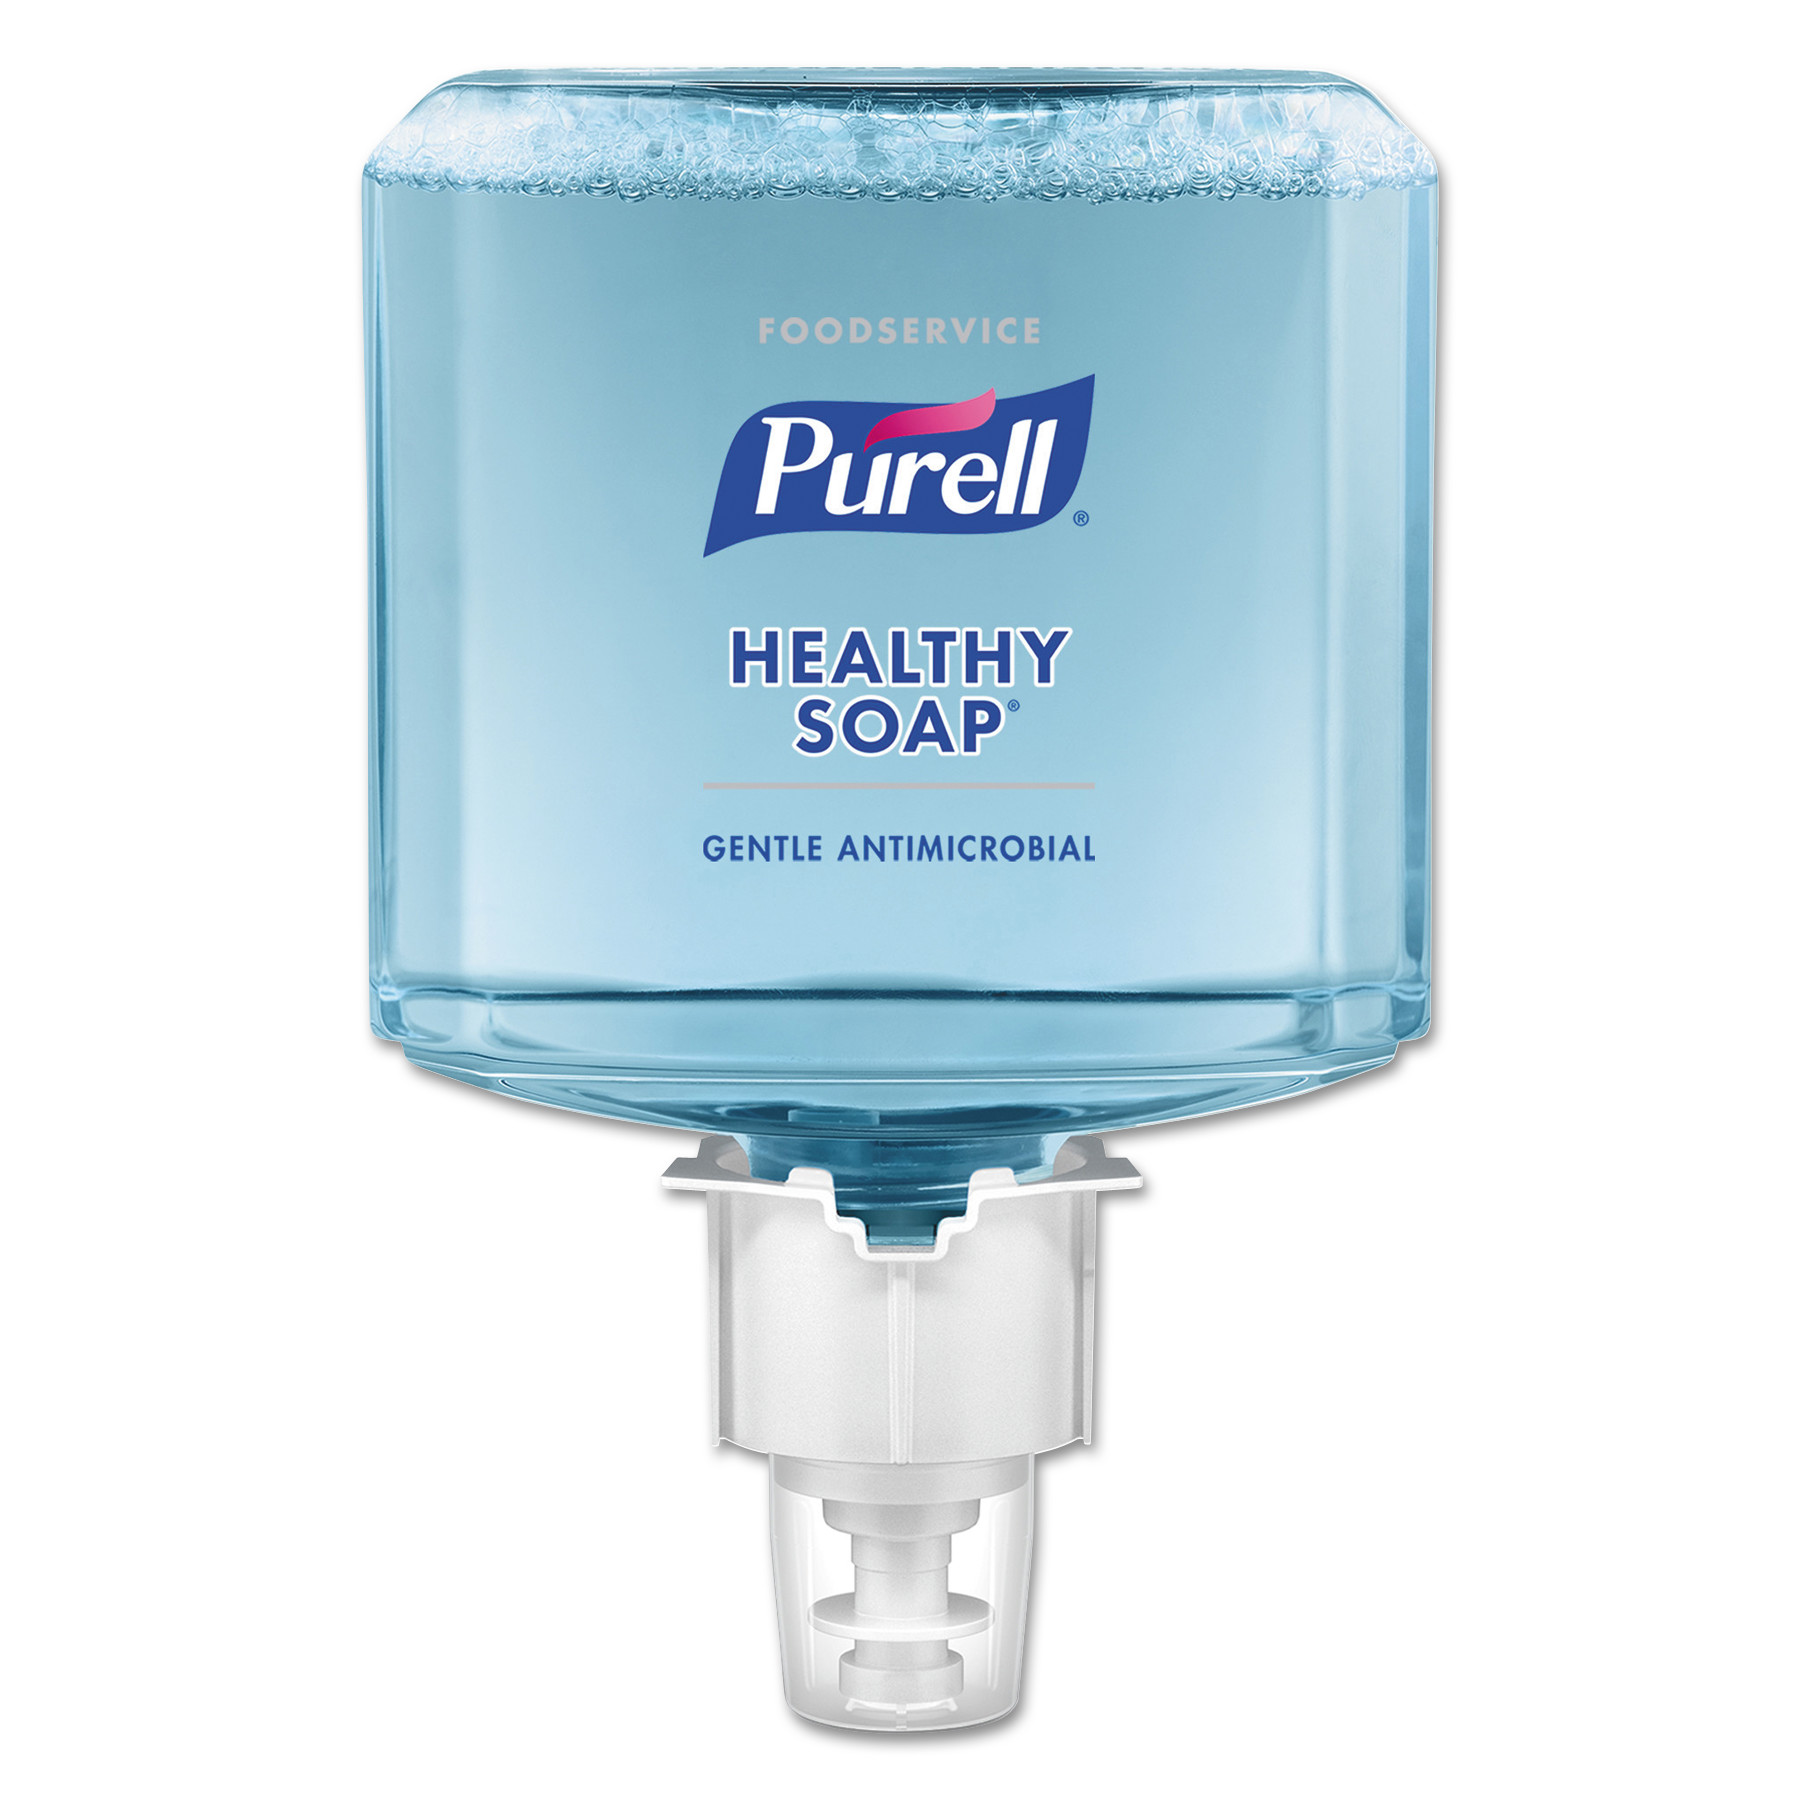  PURELL 5080-02 Foodservice HEALTHY SOAP 0.5% BAK Antimicrobial Foam, For ES4 Dispensers, 2/CT (GOJ508002) 